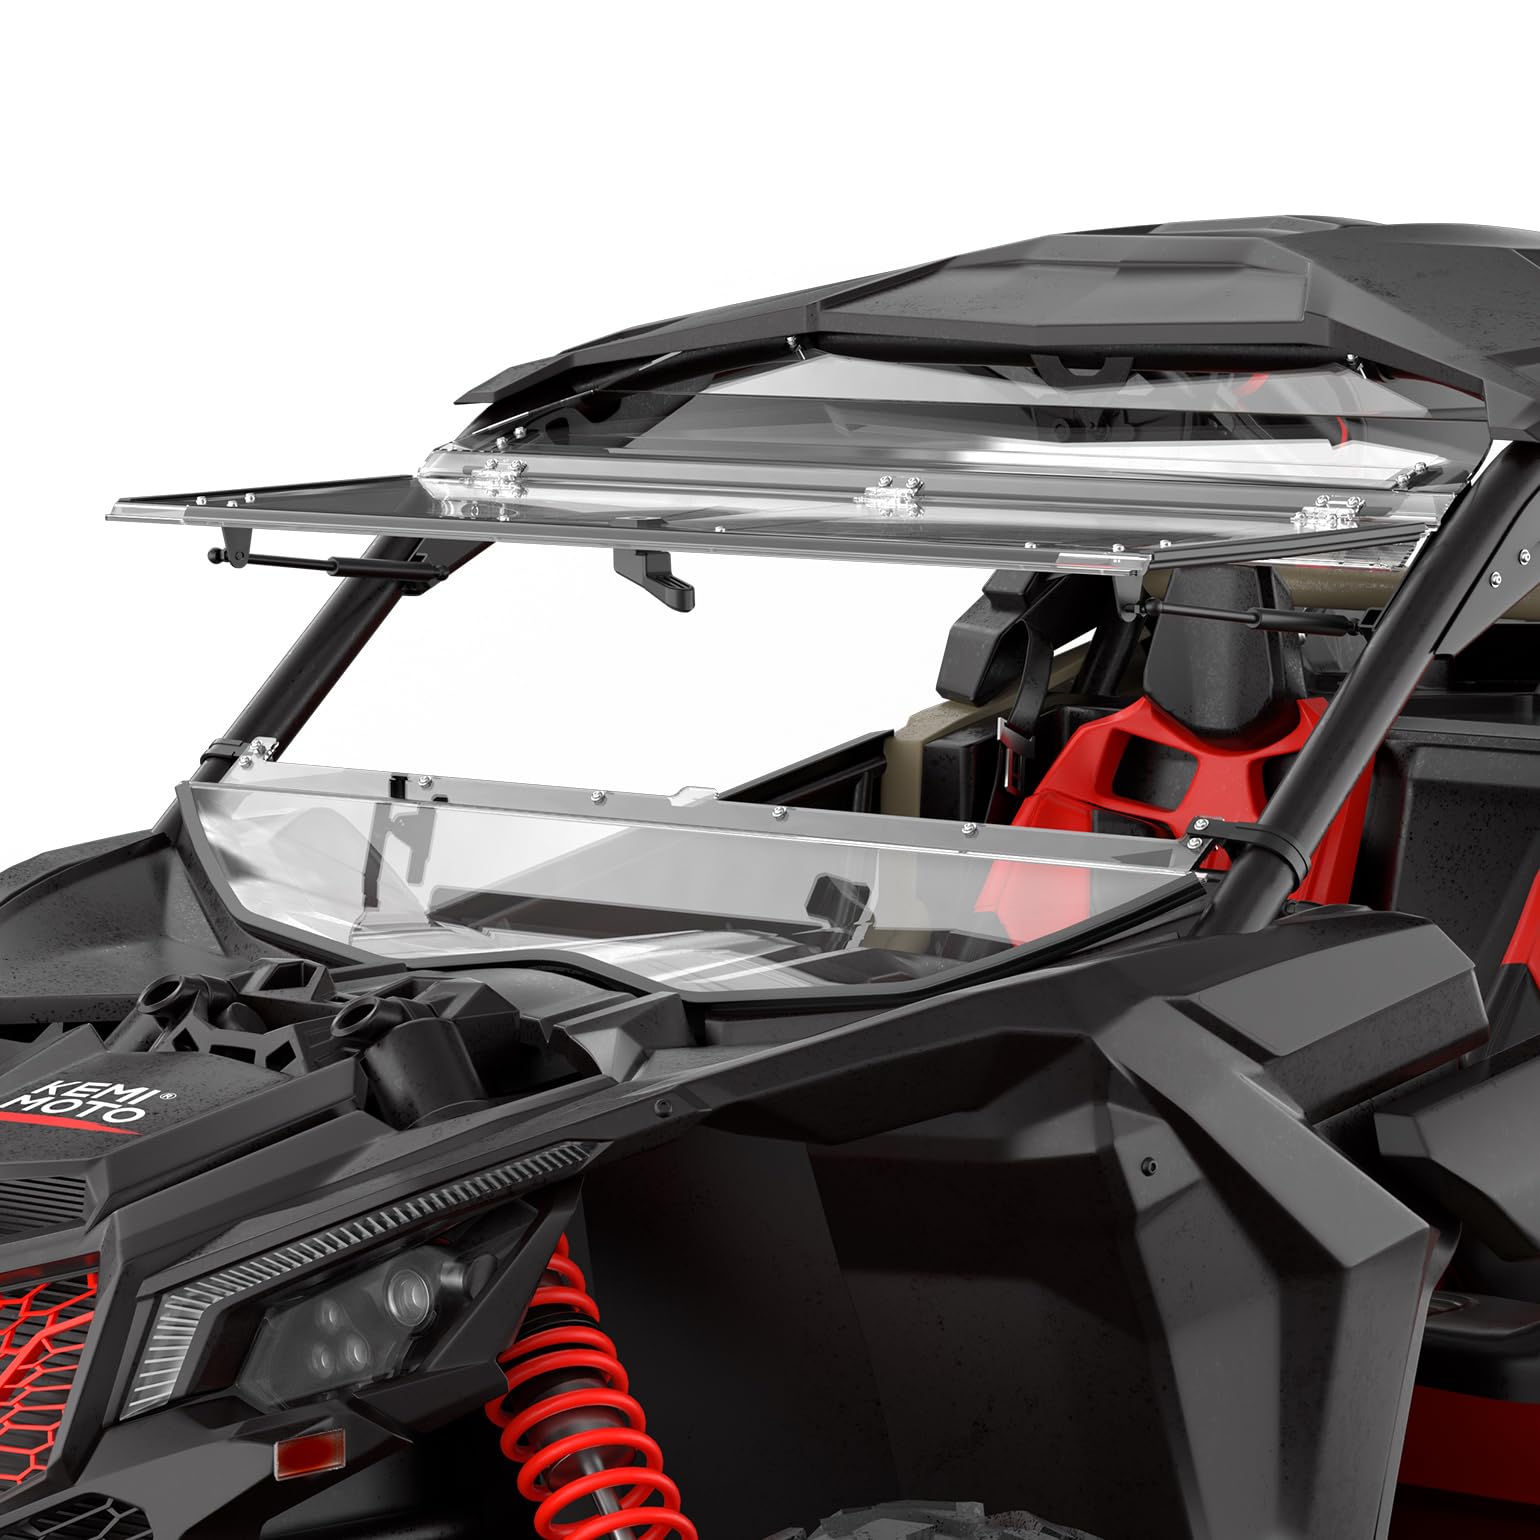 Upgraded Scratch Resistant Flip Windshield for Can-Am Maverick X3/X3 MAX - Kemimoto